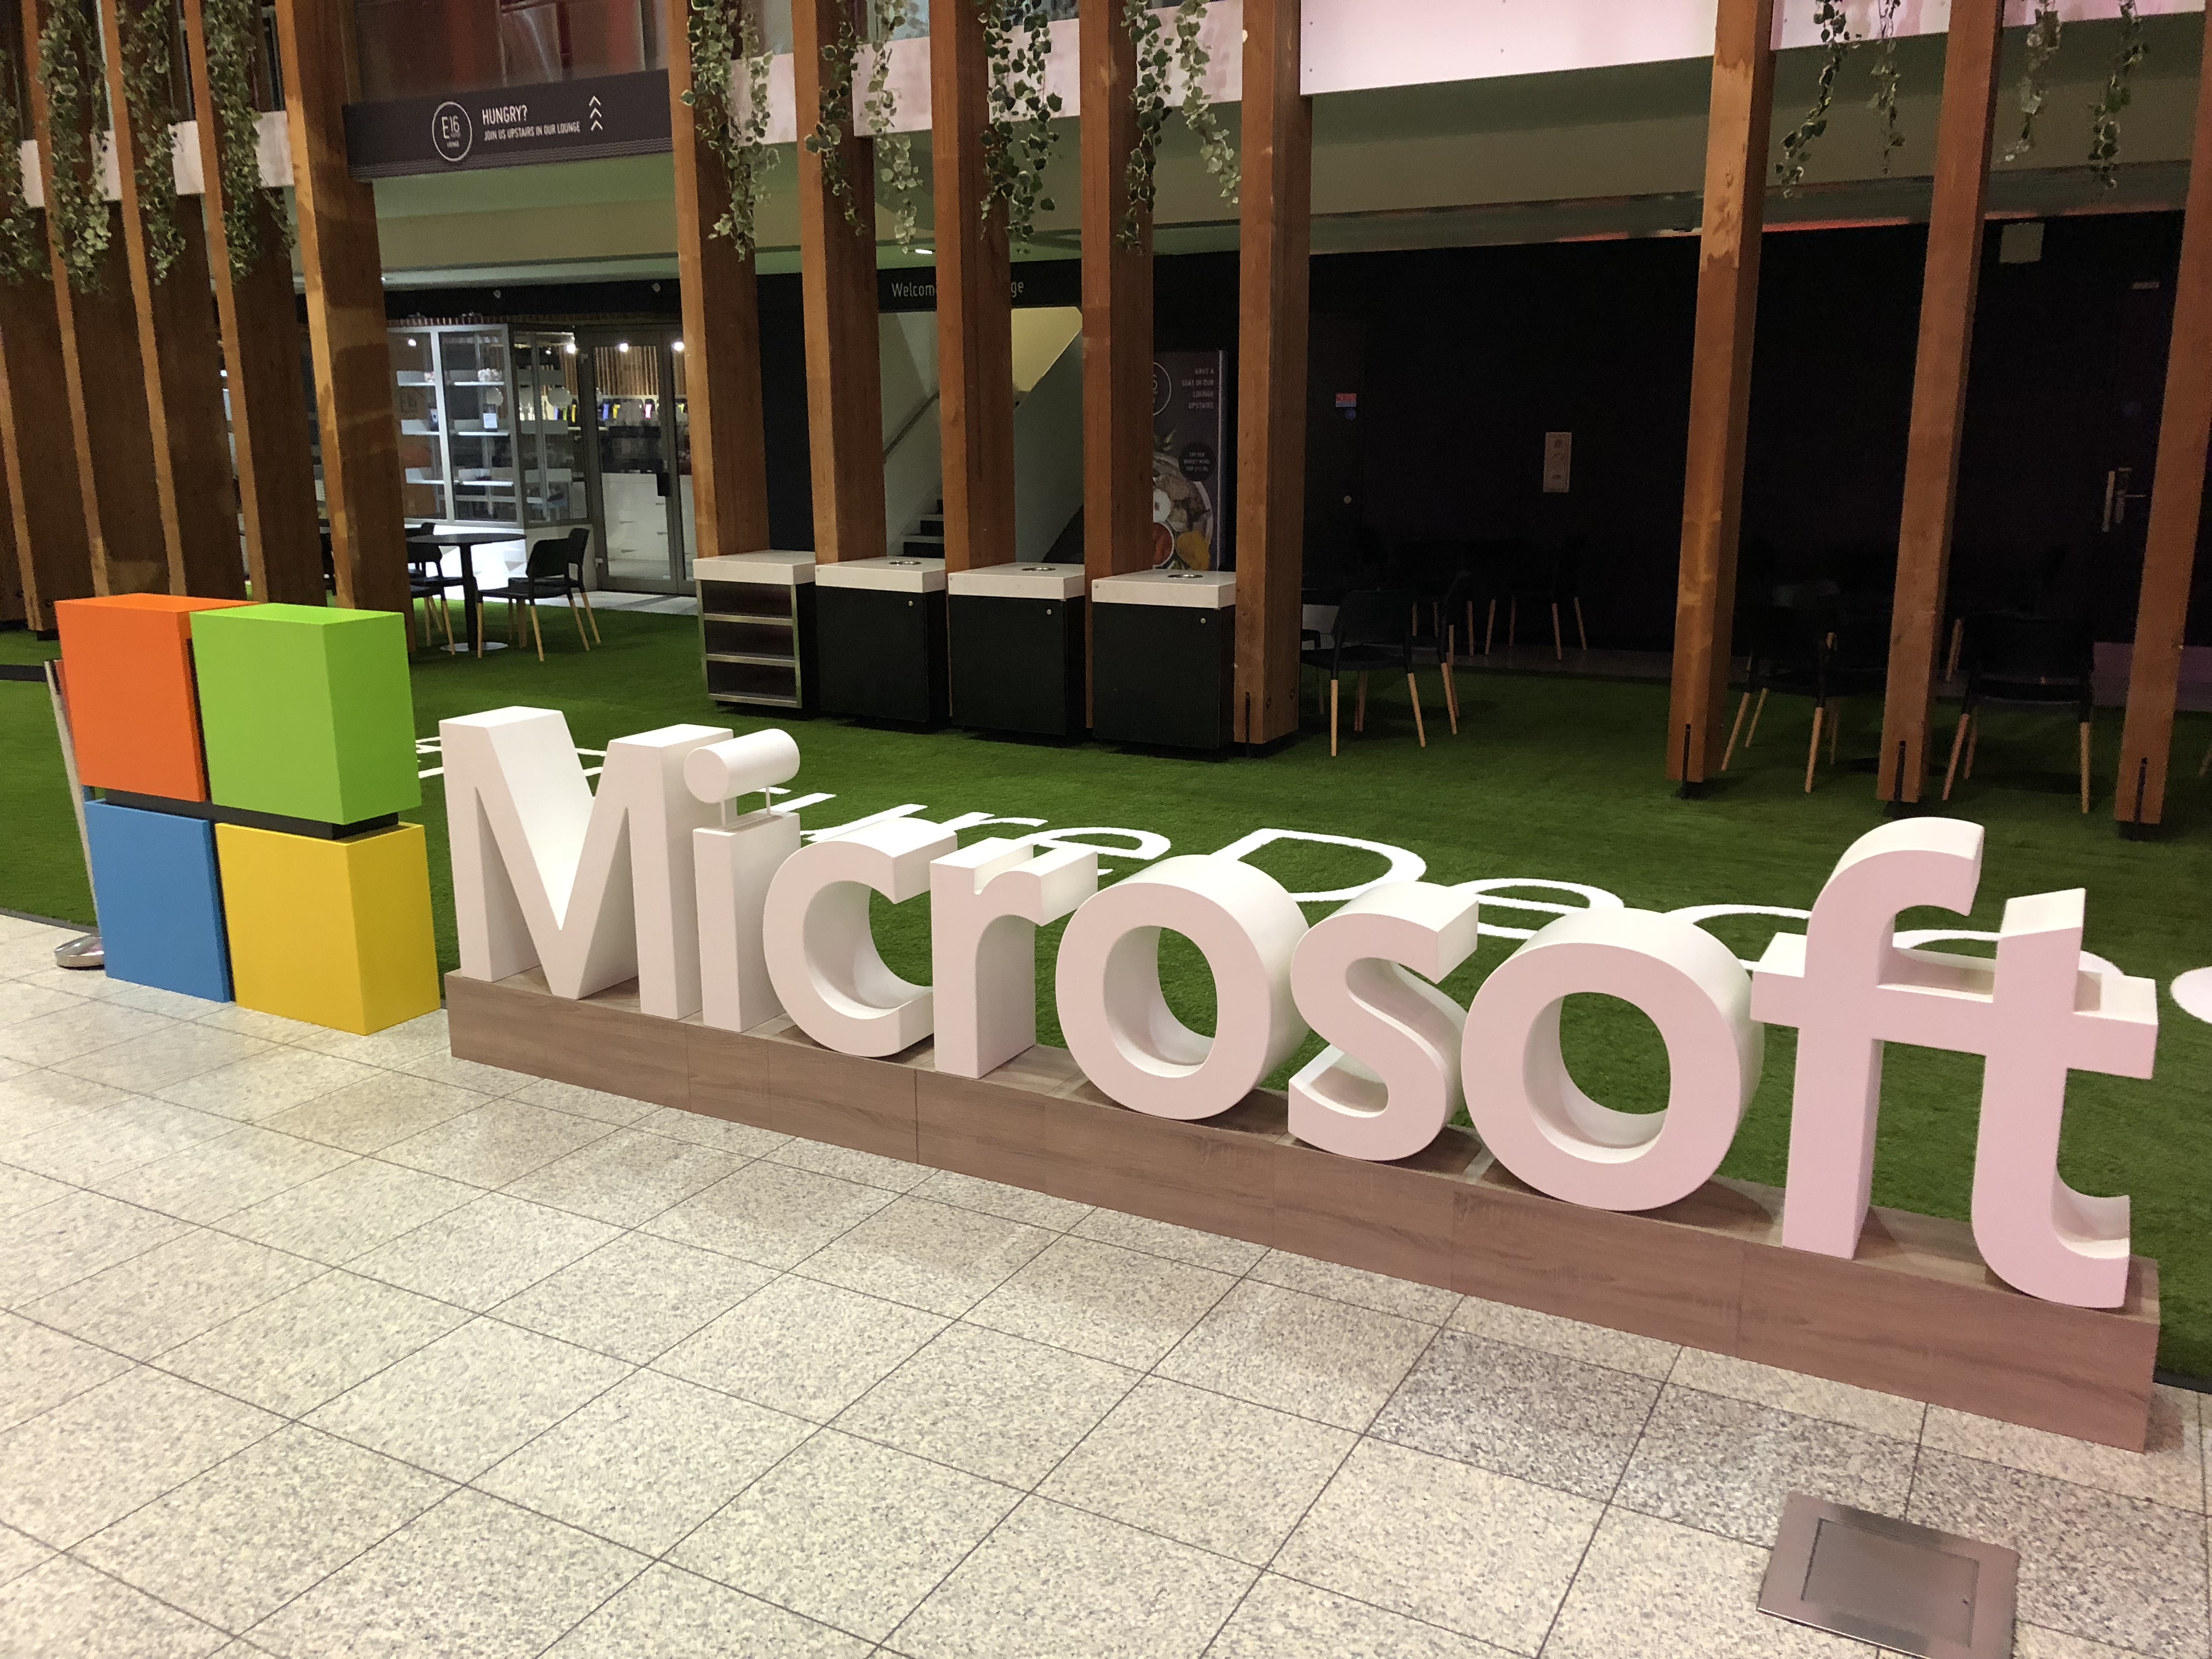 A Microsoft sign in the main concourse